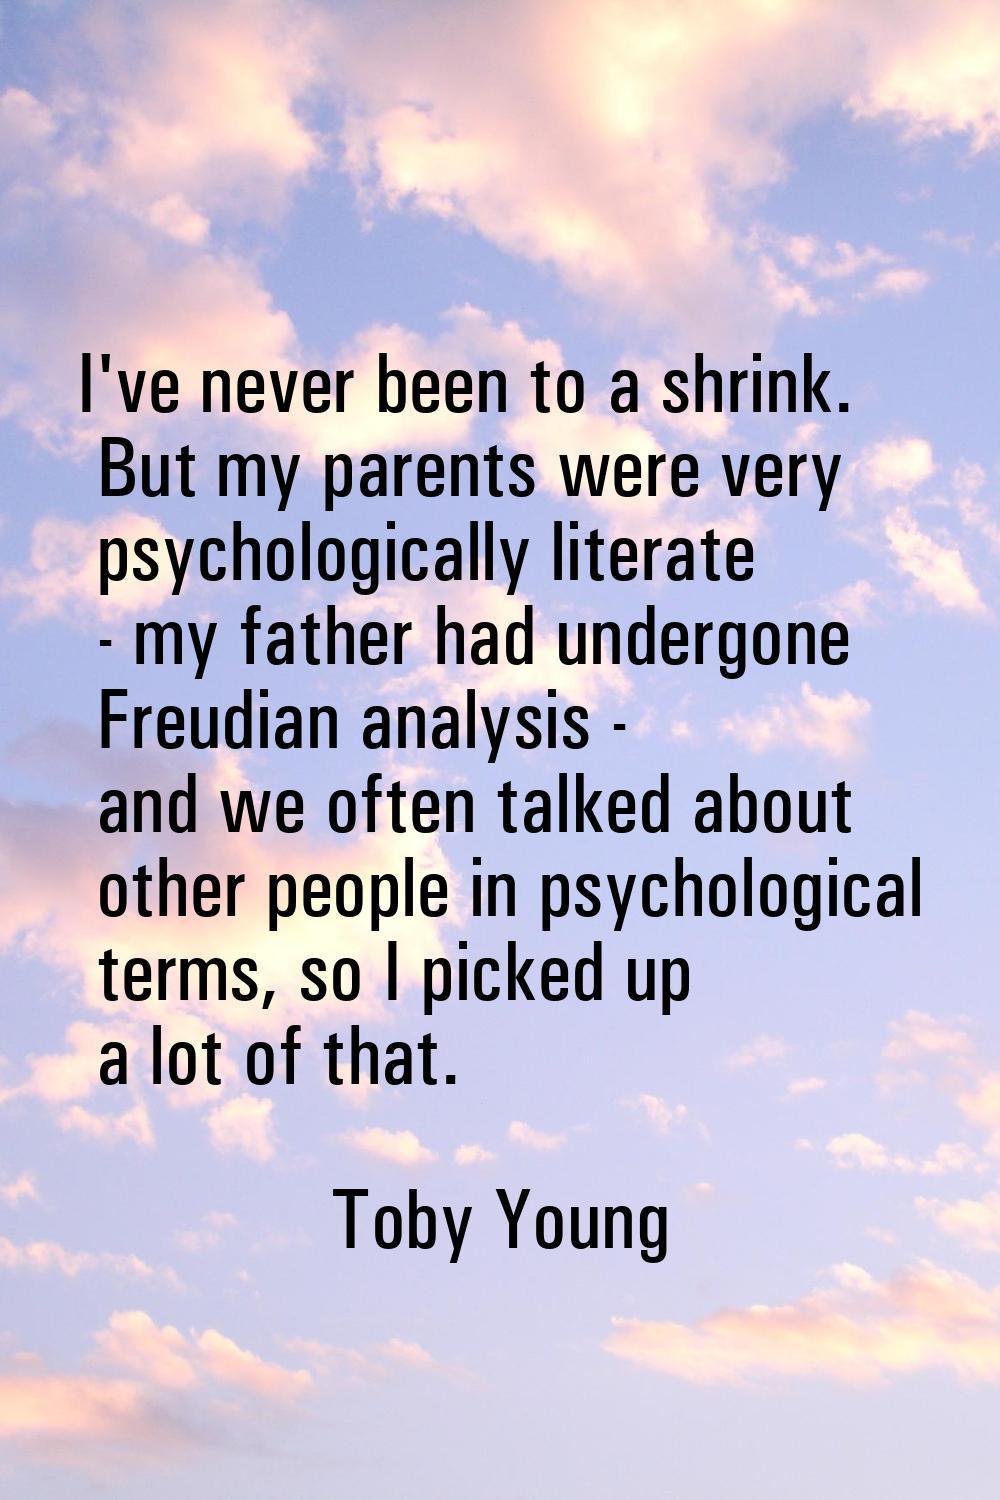 I've never been to a shrink. But my parents were very psychologically literate - my father had unde